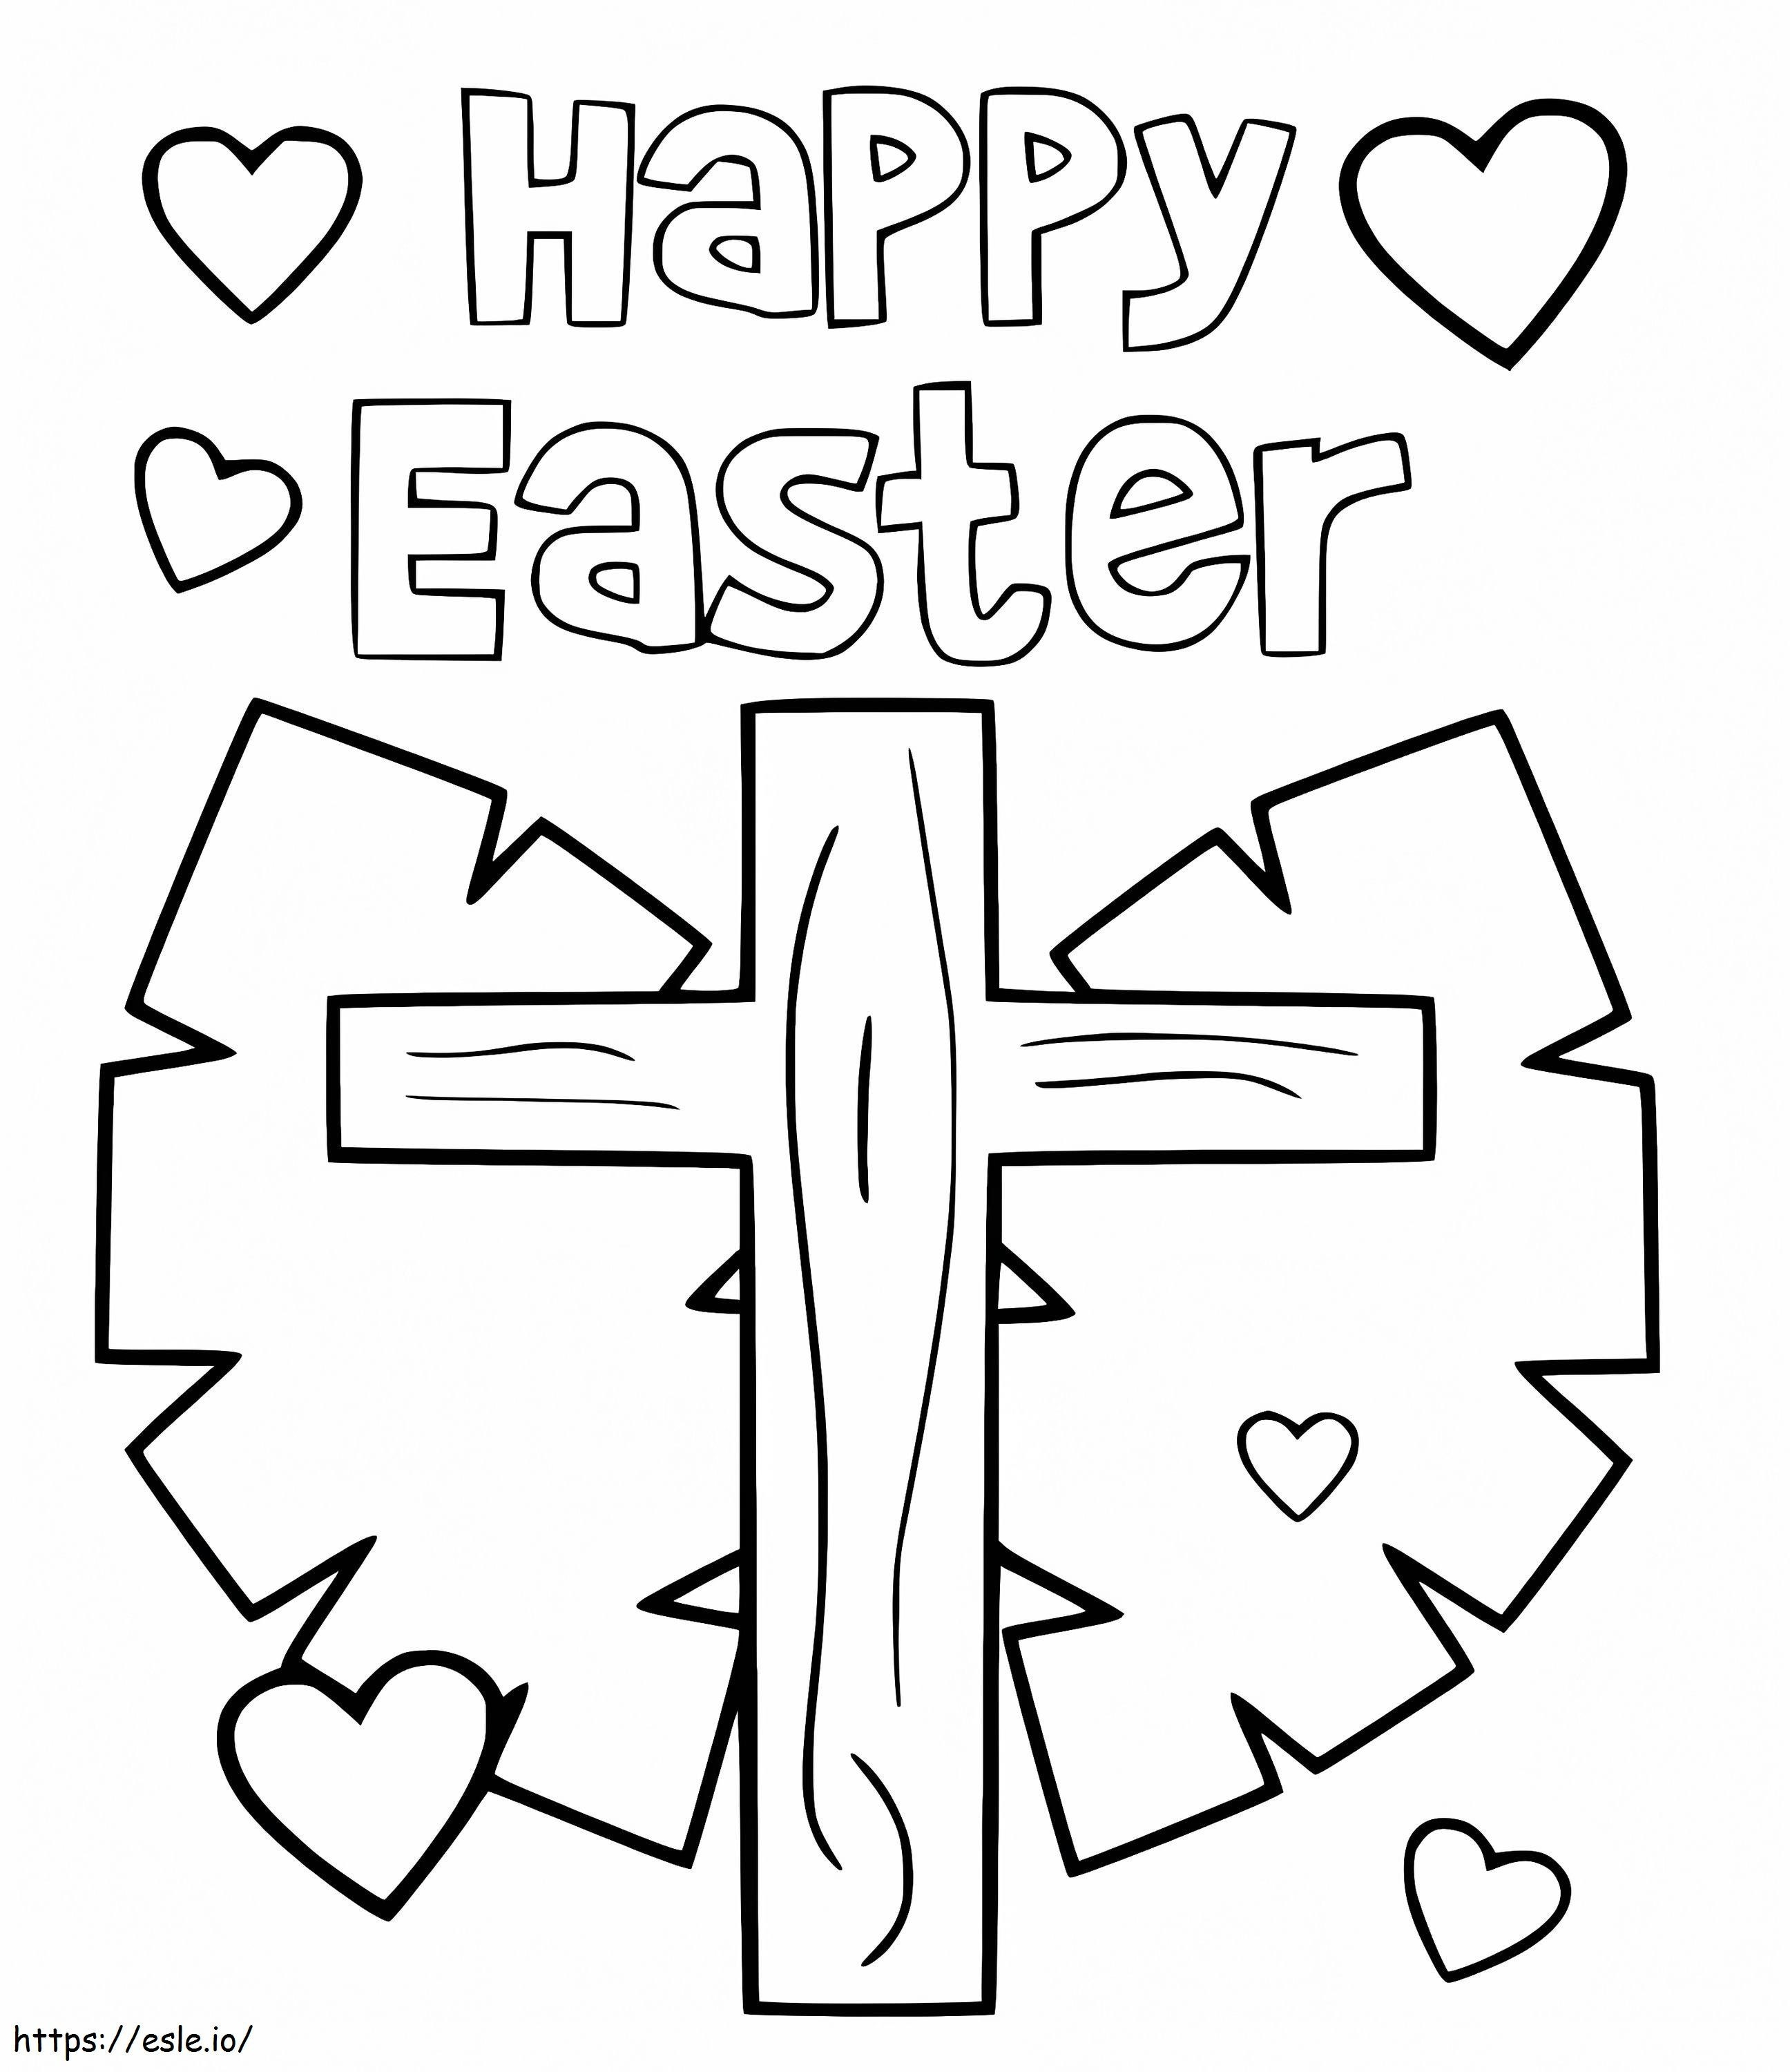 Happy Easter With Easter Cross coloring page